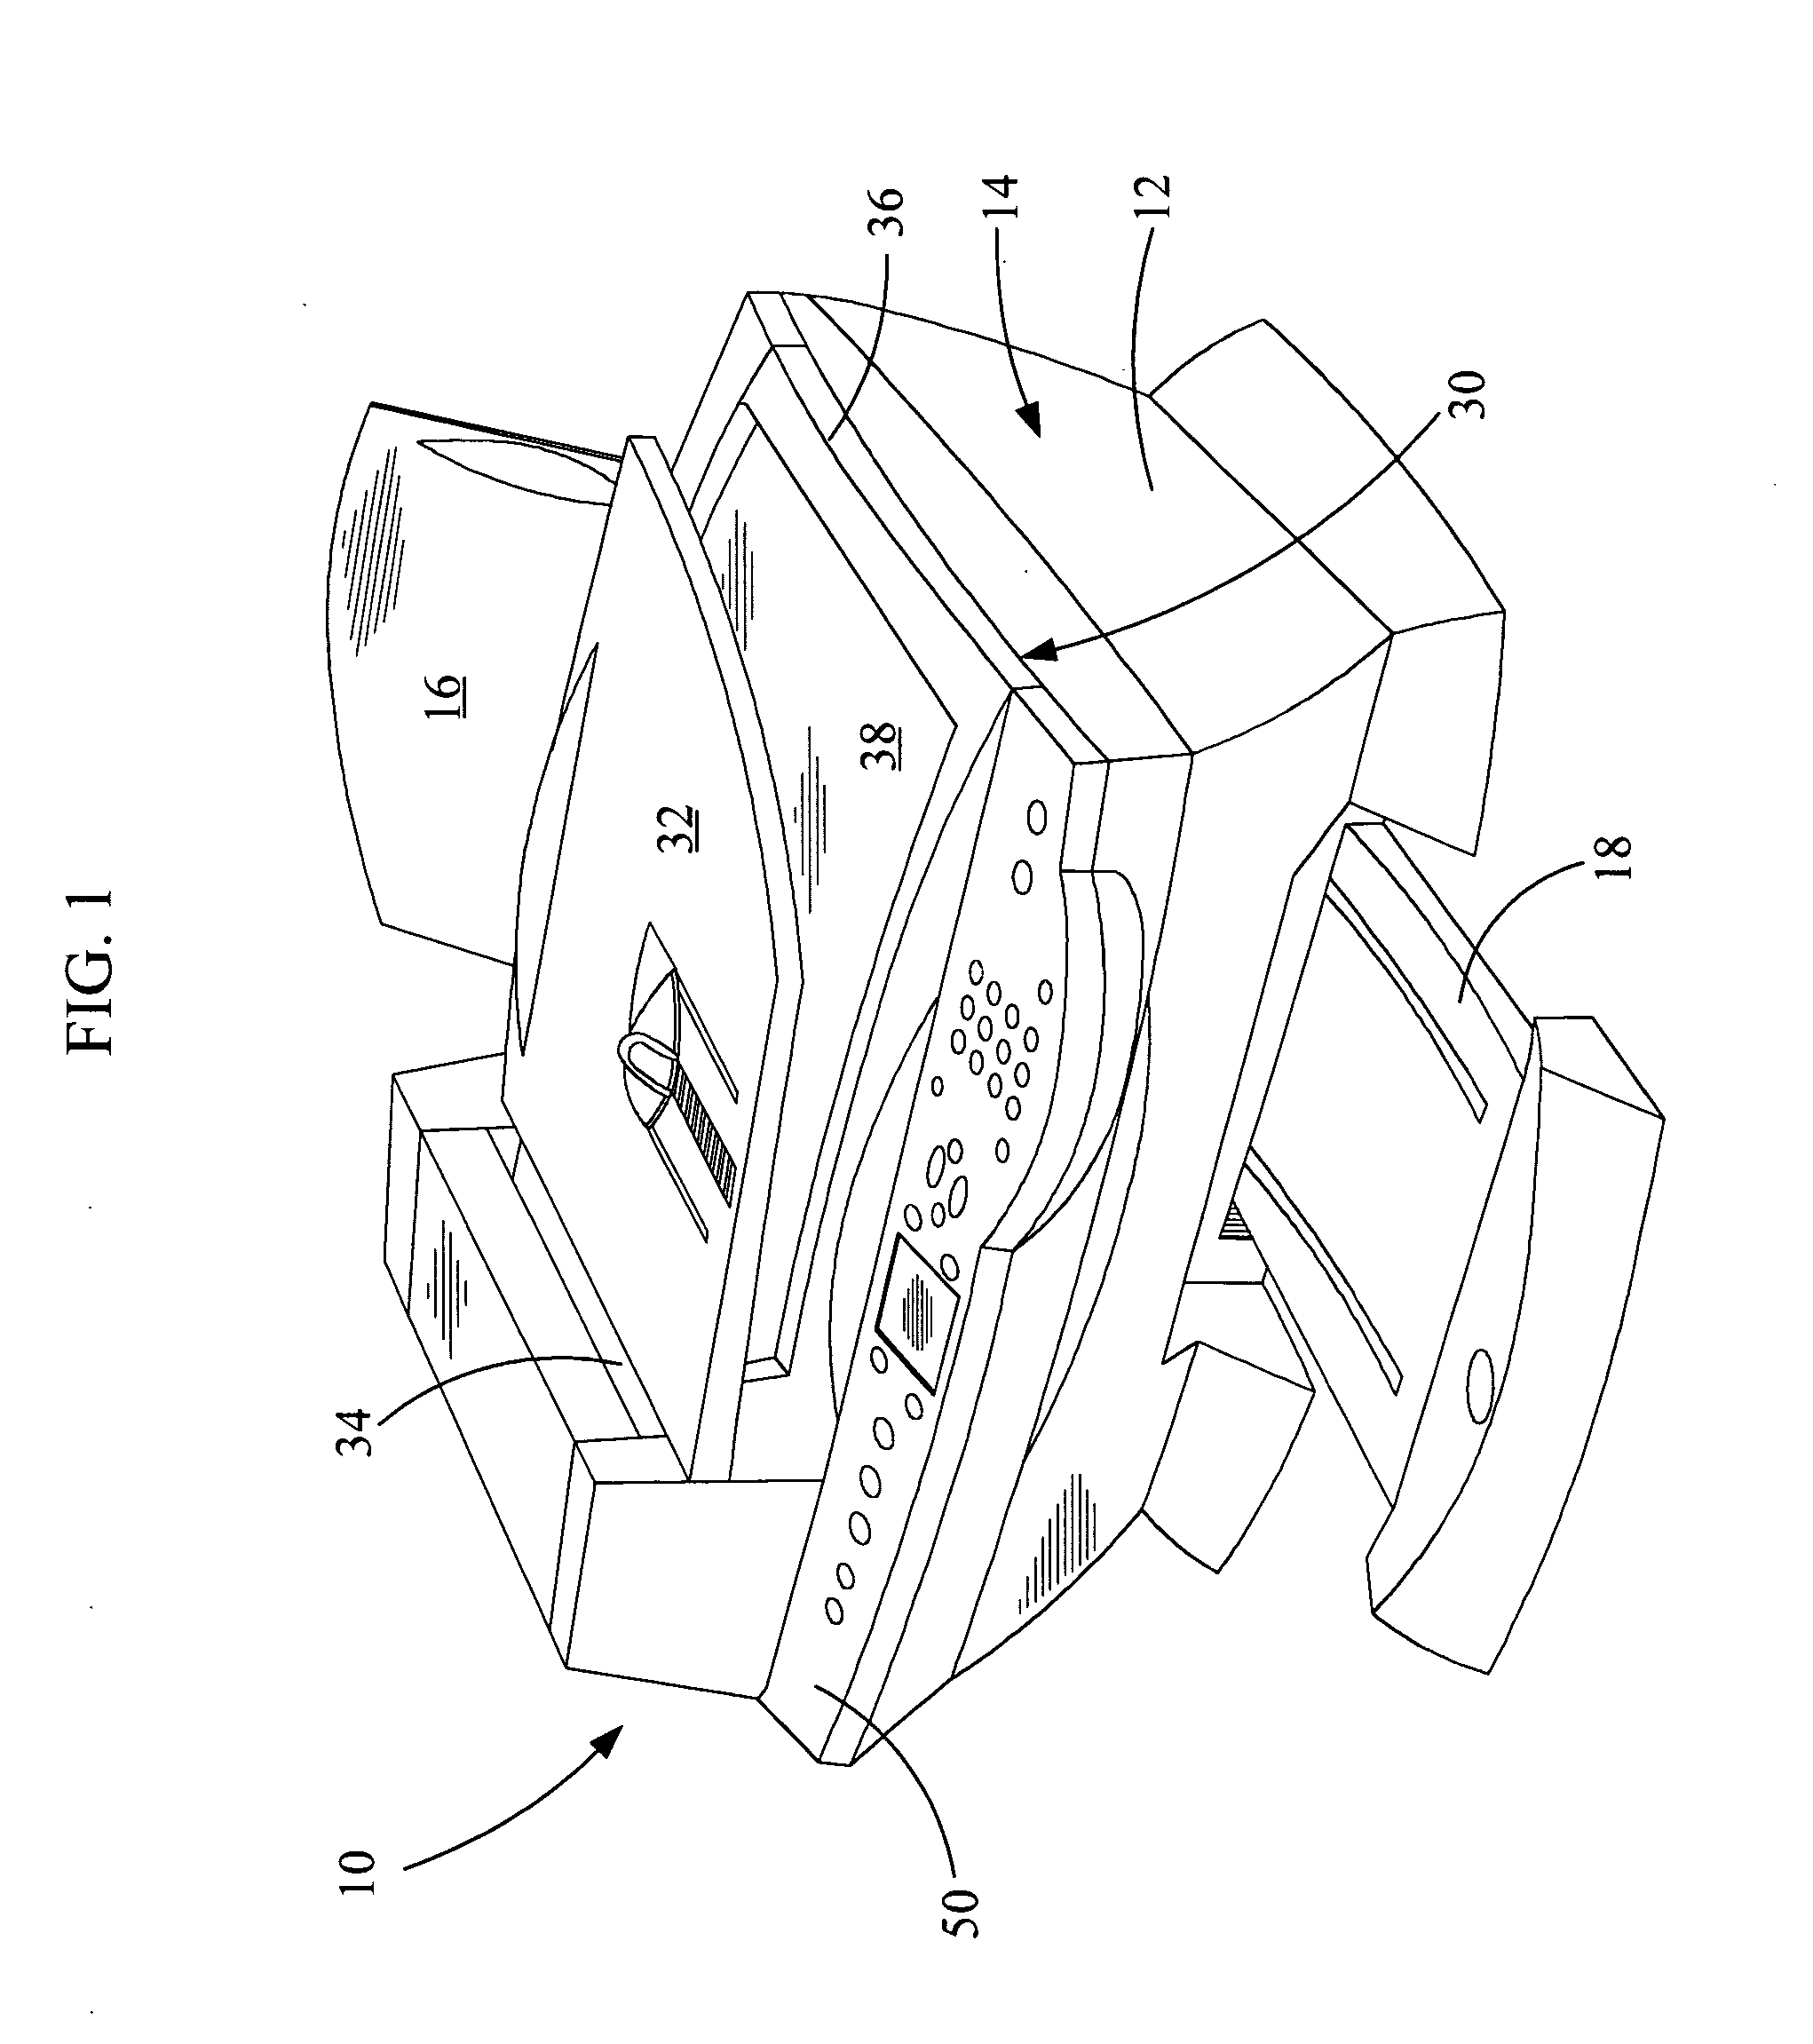 Fax review/preview function for an all-in-one multifunction peripheral with a color graphics display and method of using same